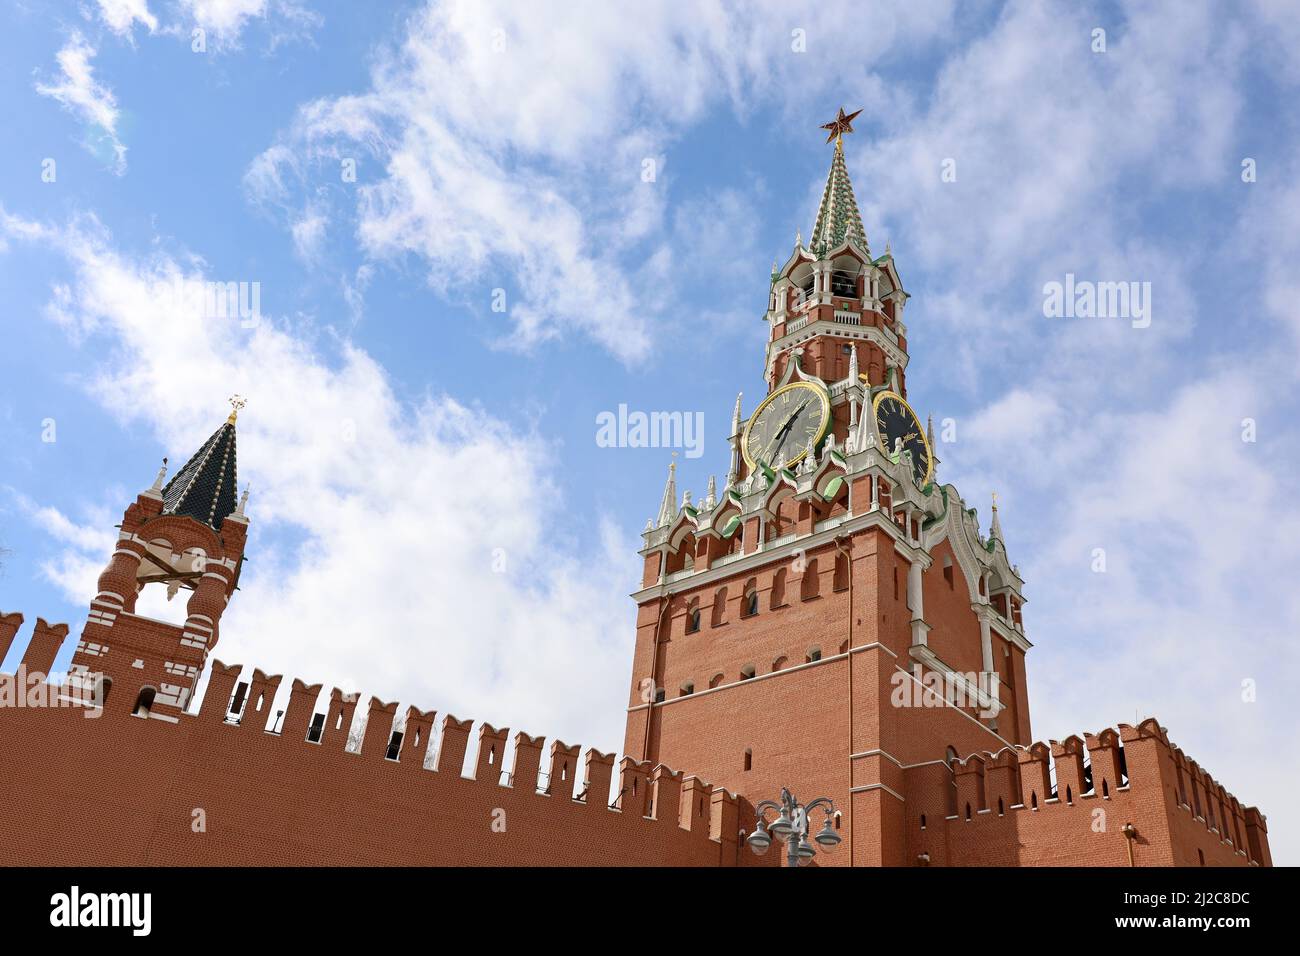 Moscow Kremlin tower and brick wall on blue sky and white clouds background. Chimes of Spasskaya tower, symbol of Russia on Red Square Stock Photo